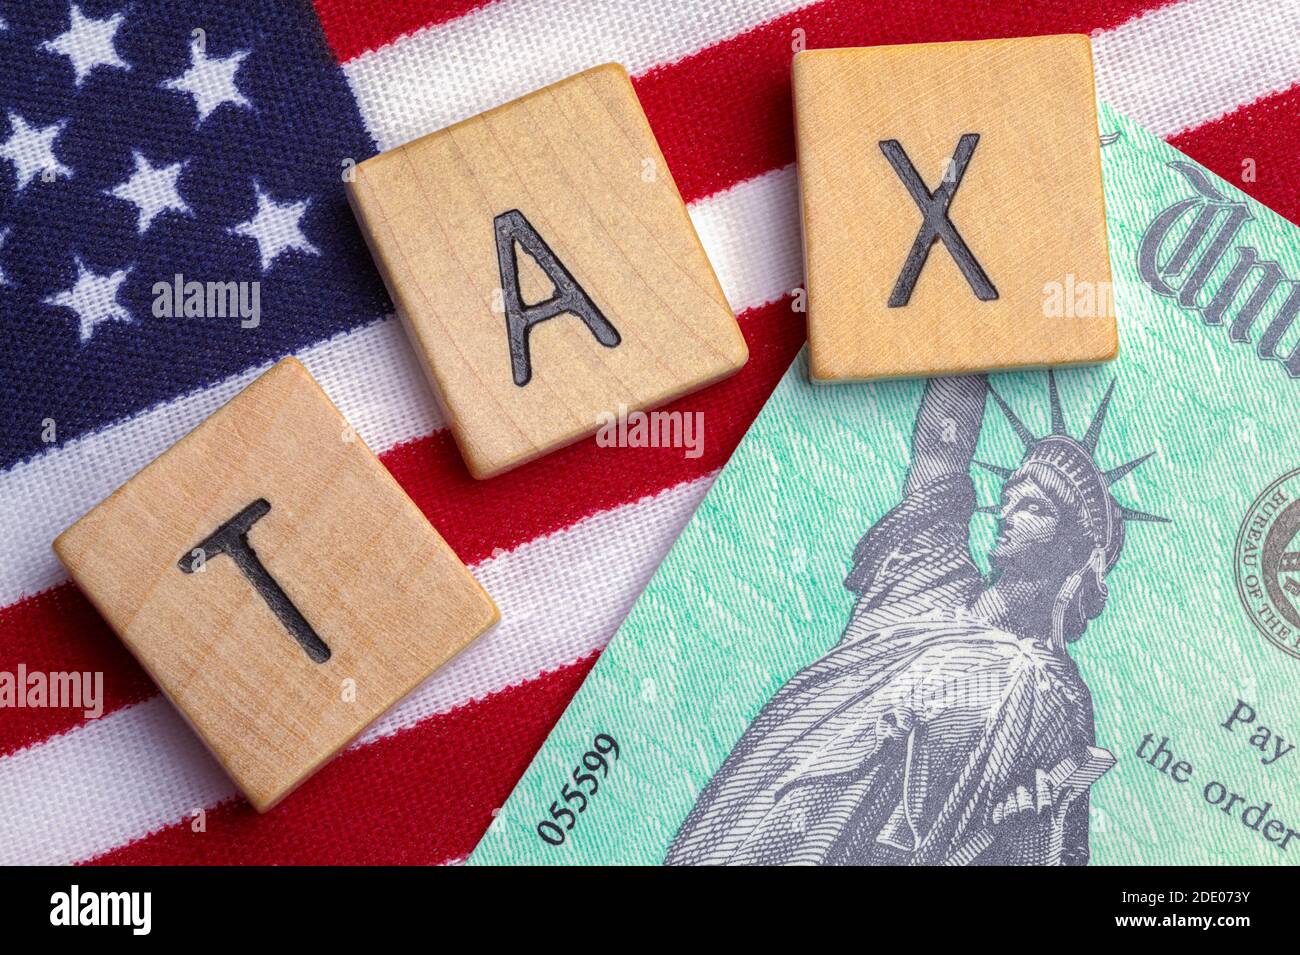 Tax Refund Check with USA Flag and Wood Blocks Spelling TAX. Stock Photo